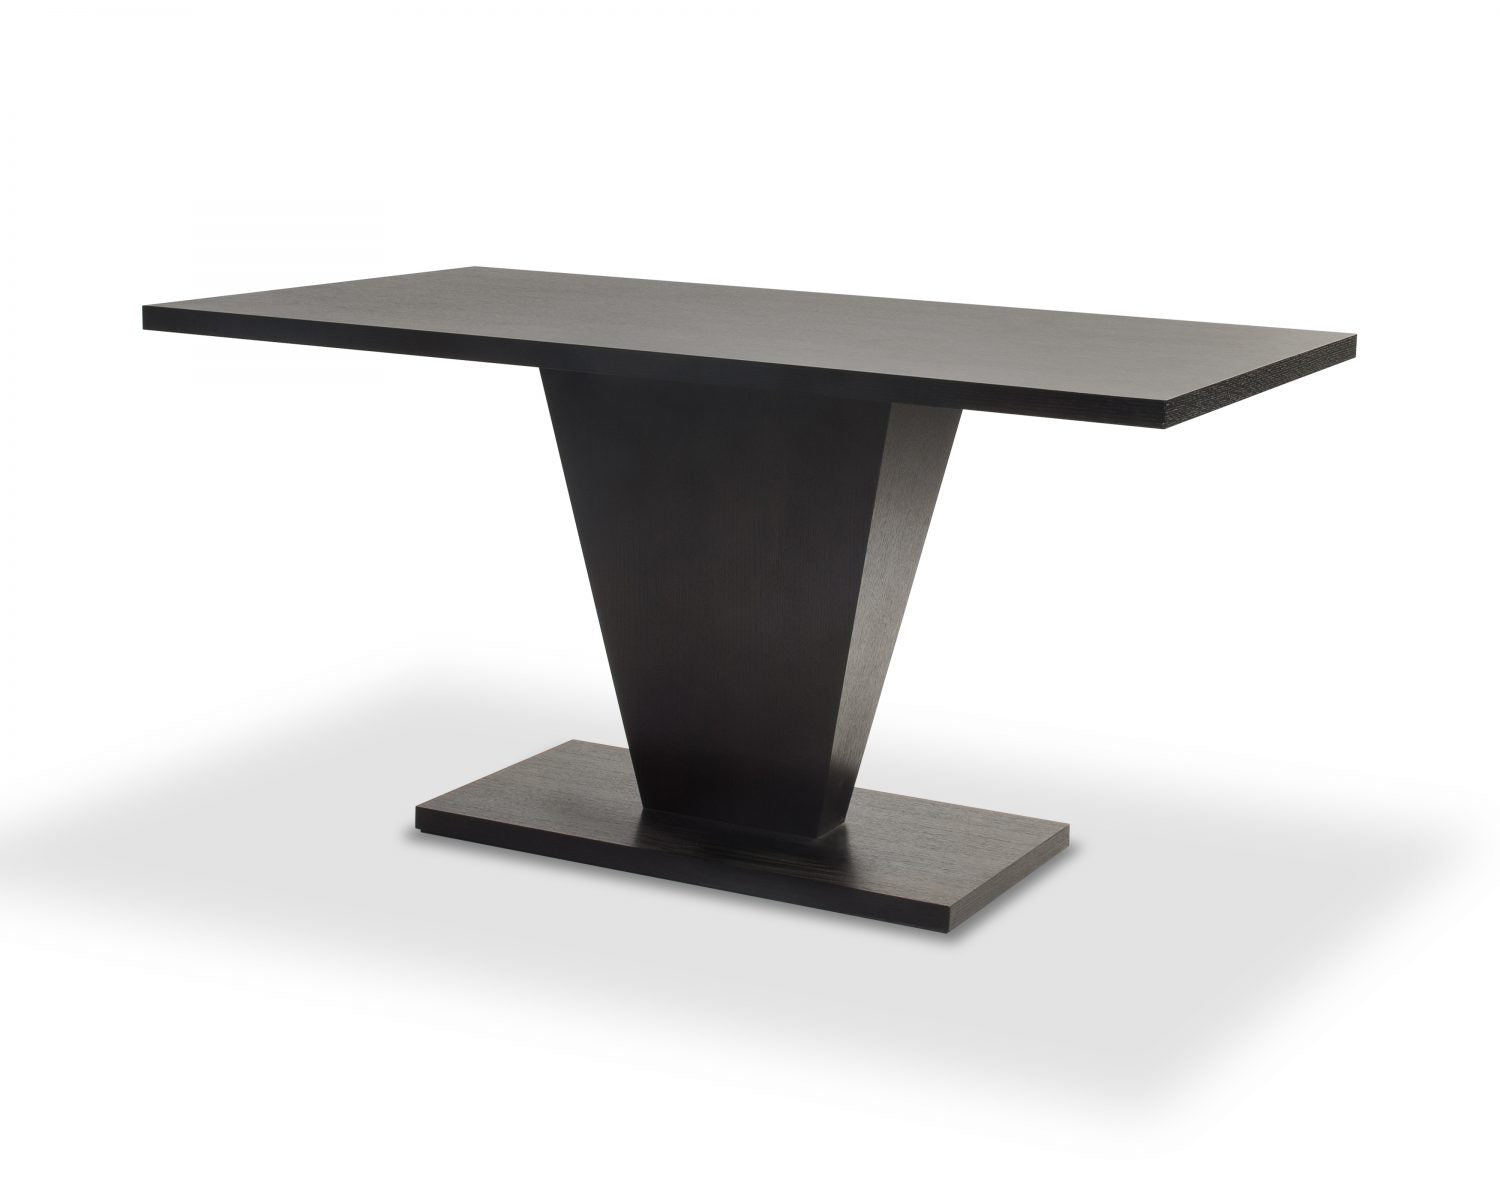  LiangAndEimil-Liang & Eimil Dorset Dining Table- 77 